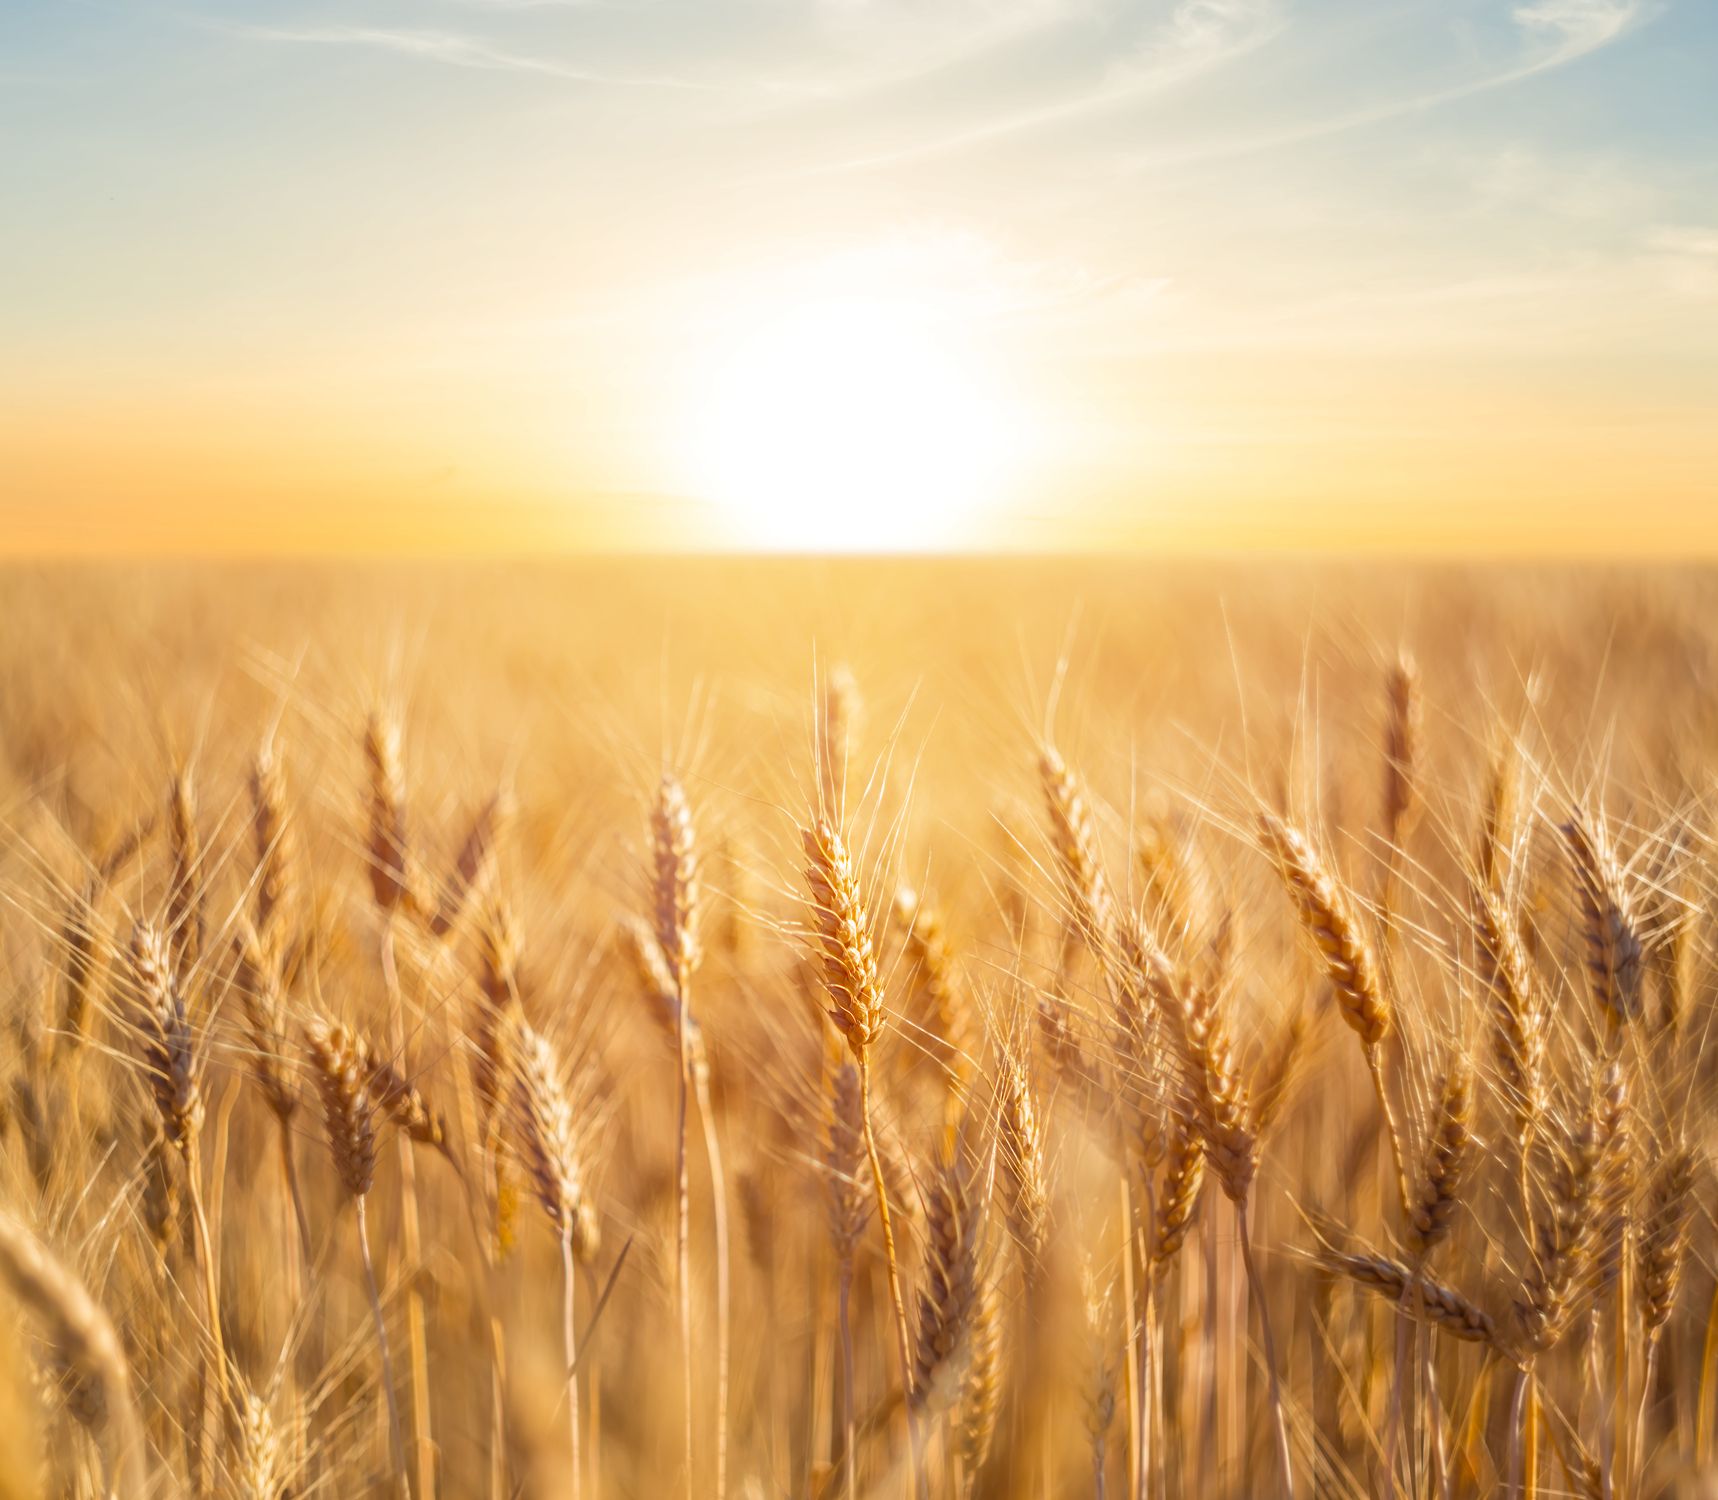 Four myths about wheat, busted